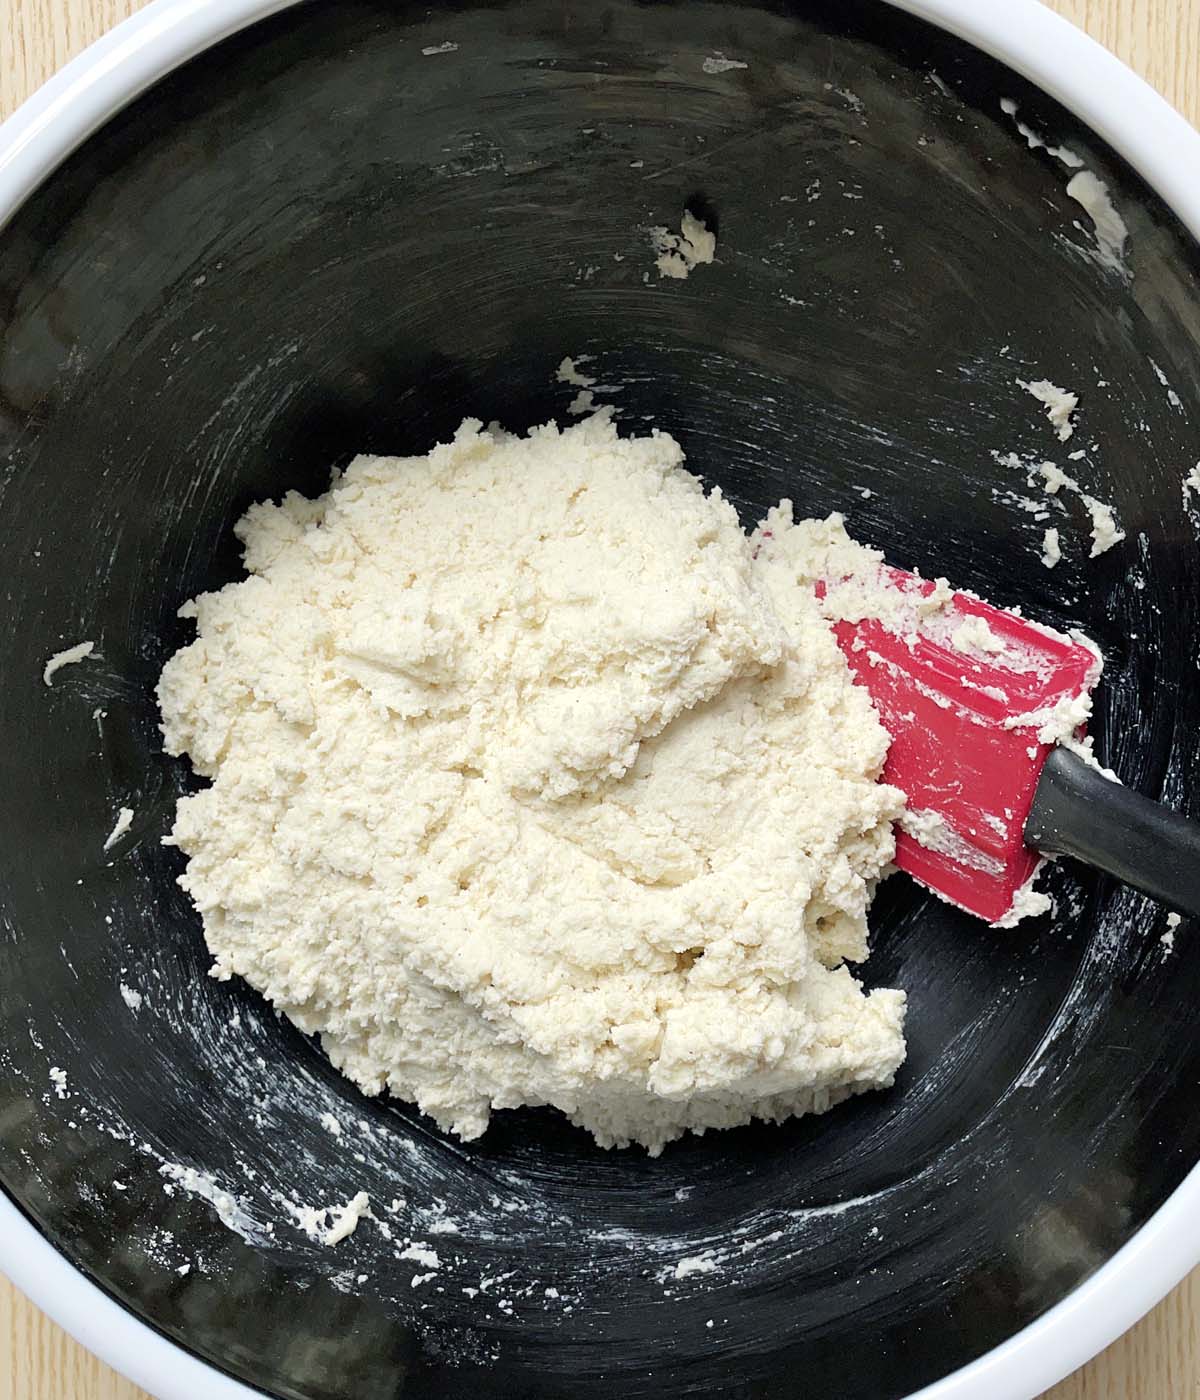 A ball of shaggy light colored dough and a red rubber spatula in a black bowl.